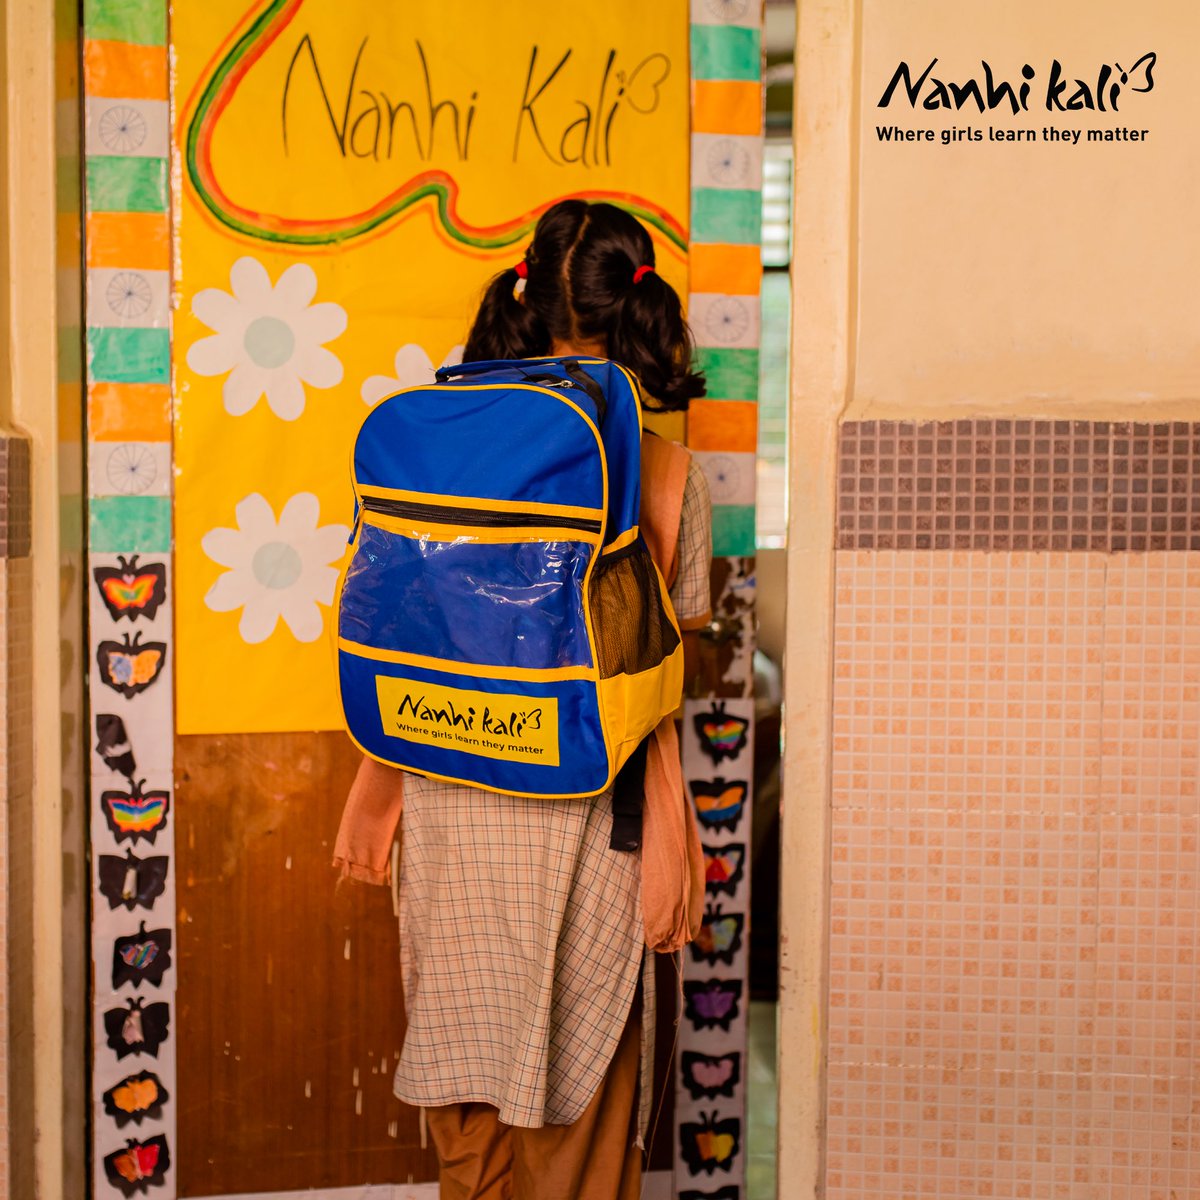 Opening the door to growth, learning and opportunities! To help support underprivileged girls in their educational journey, visit nanhikali.org #NanhiKali #WhereGirlsLearnTheyMatter #EveryGirlMatters